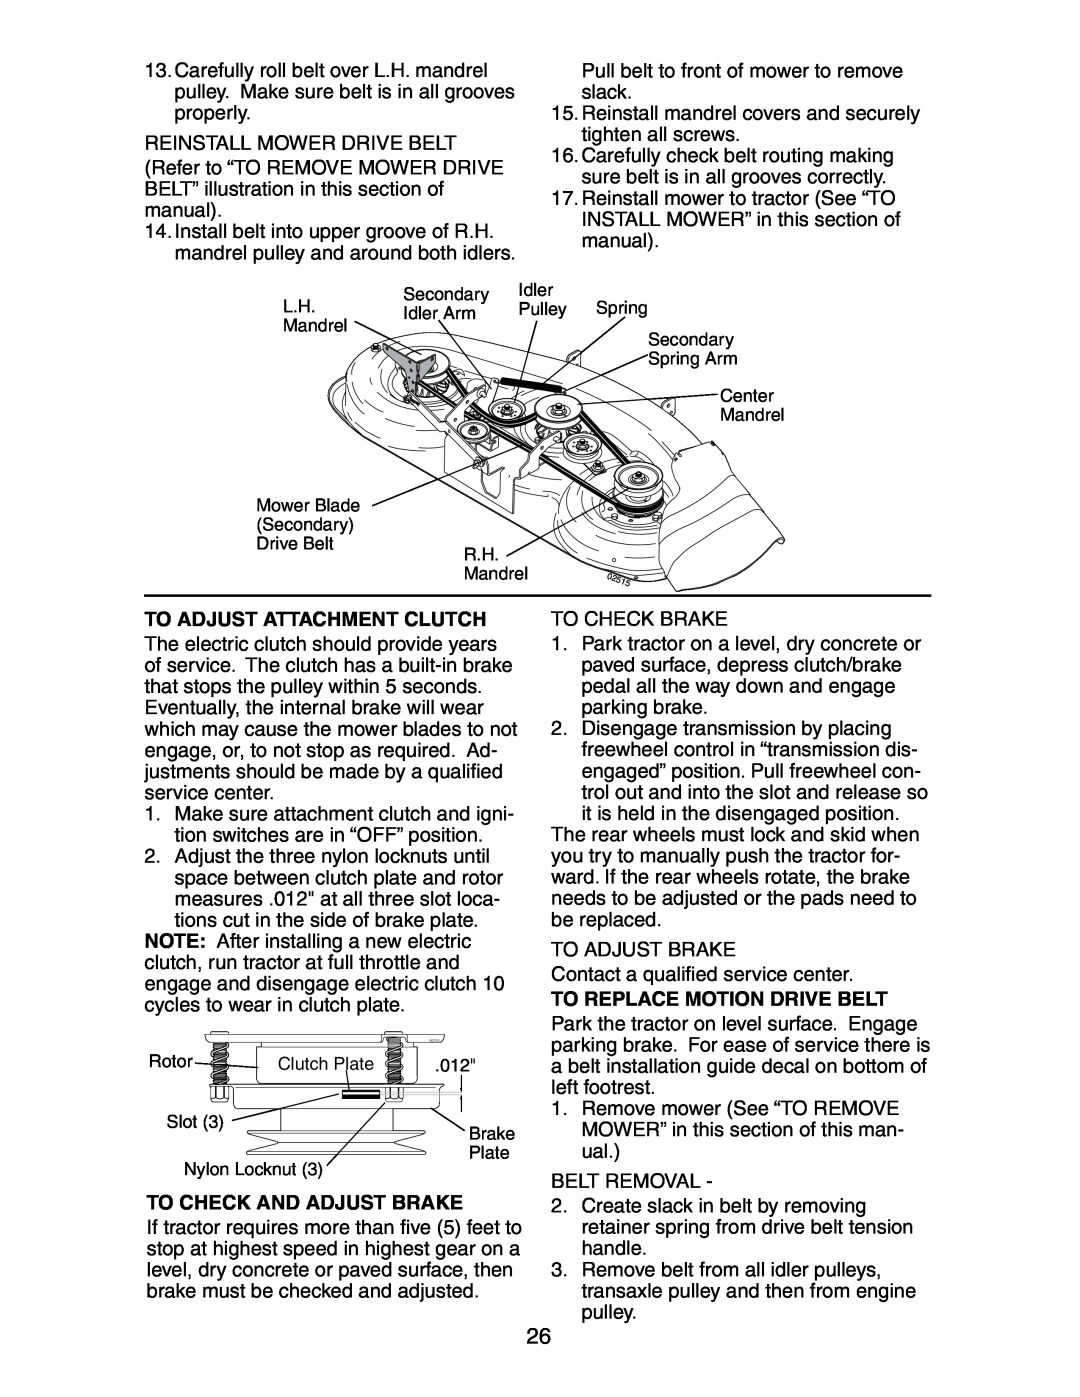 Poulan COGT22H48A manual To Adjust Attachment Clutch, To Replace Motion Drive Belt, To Check And Adjust Brake 